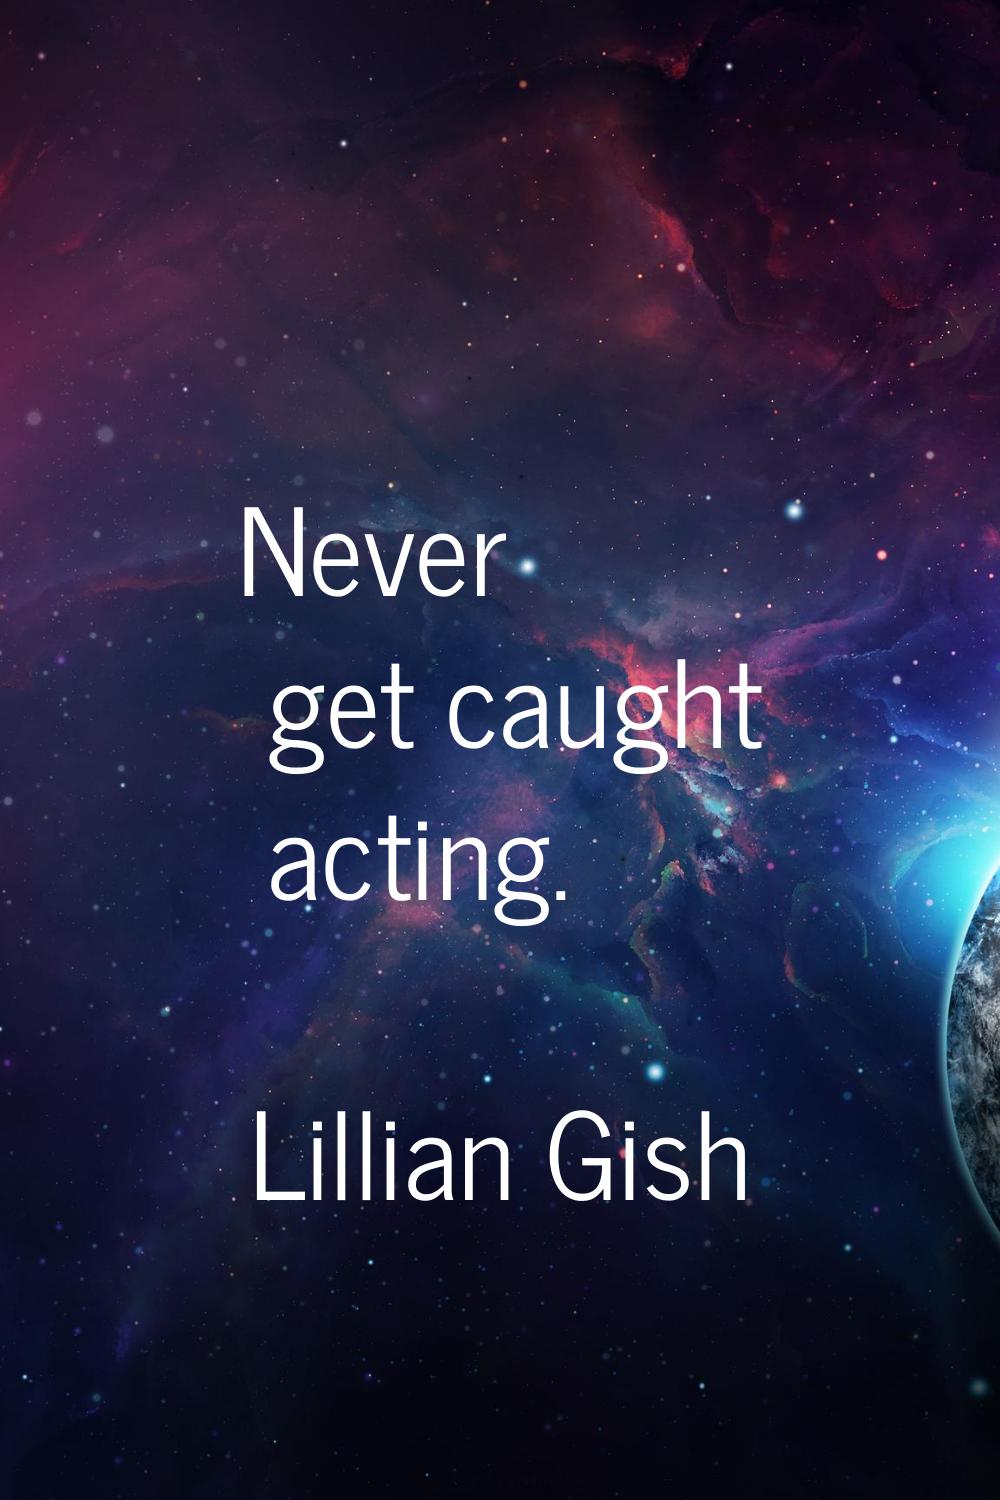 Never get caught acting.